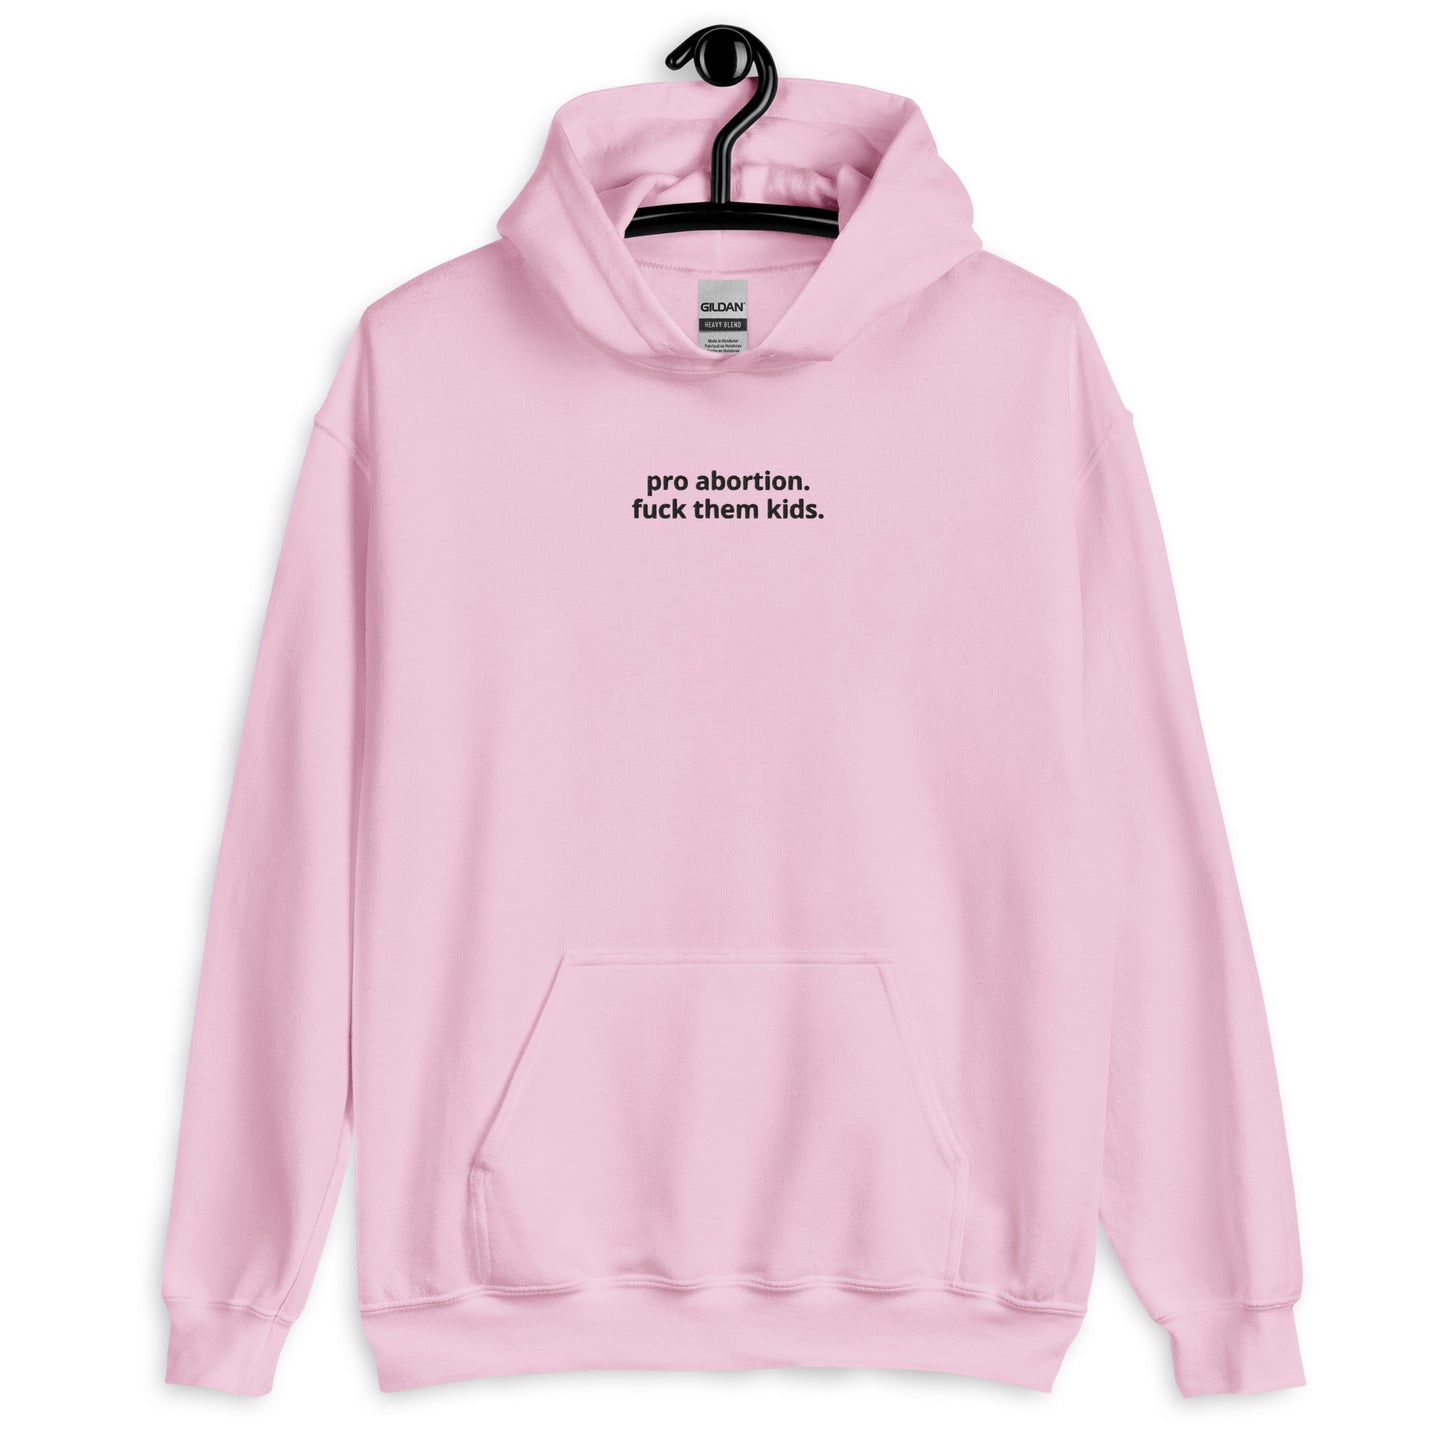 pro abortion Hoodie